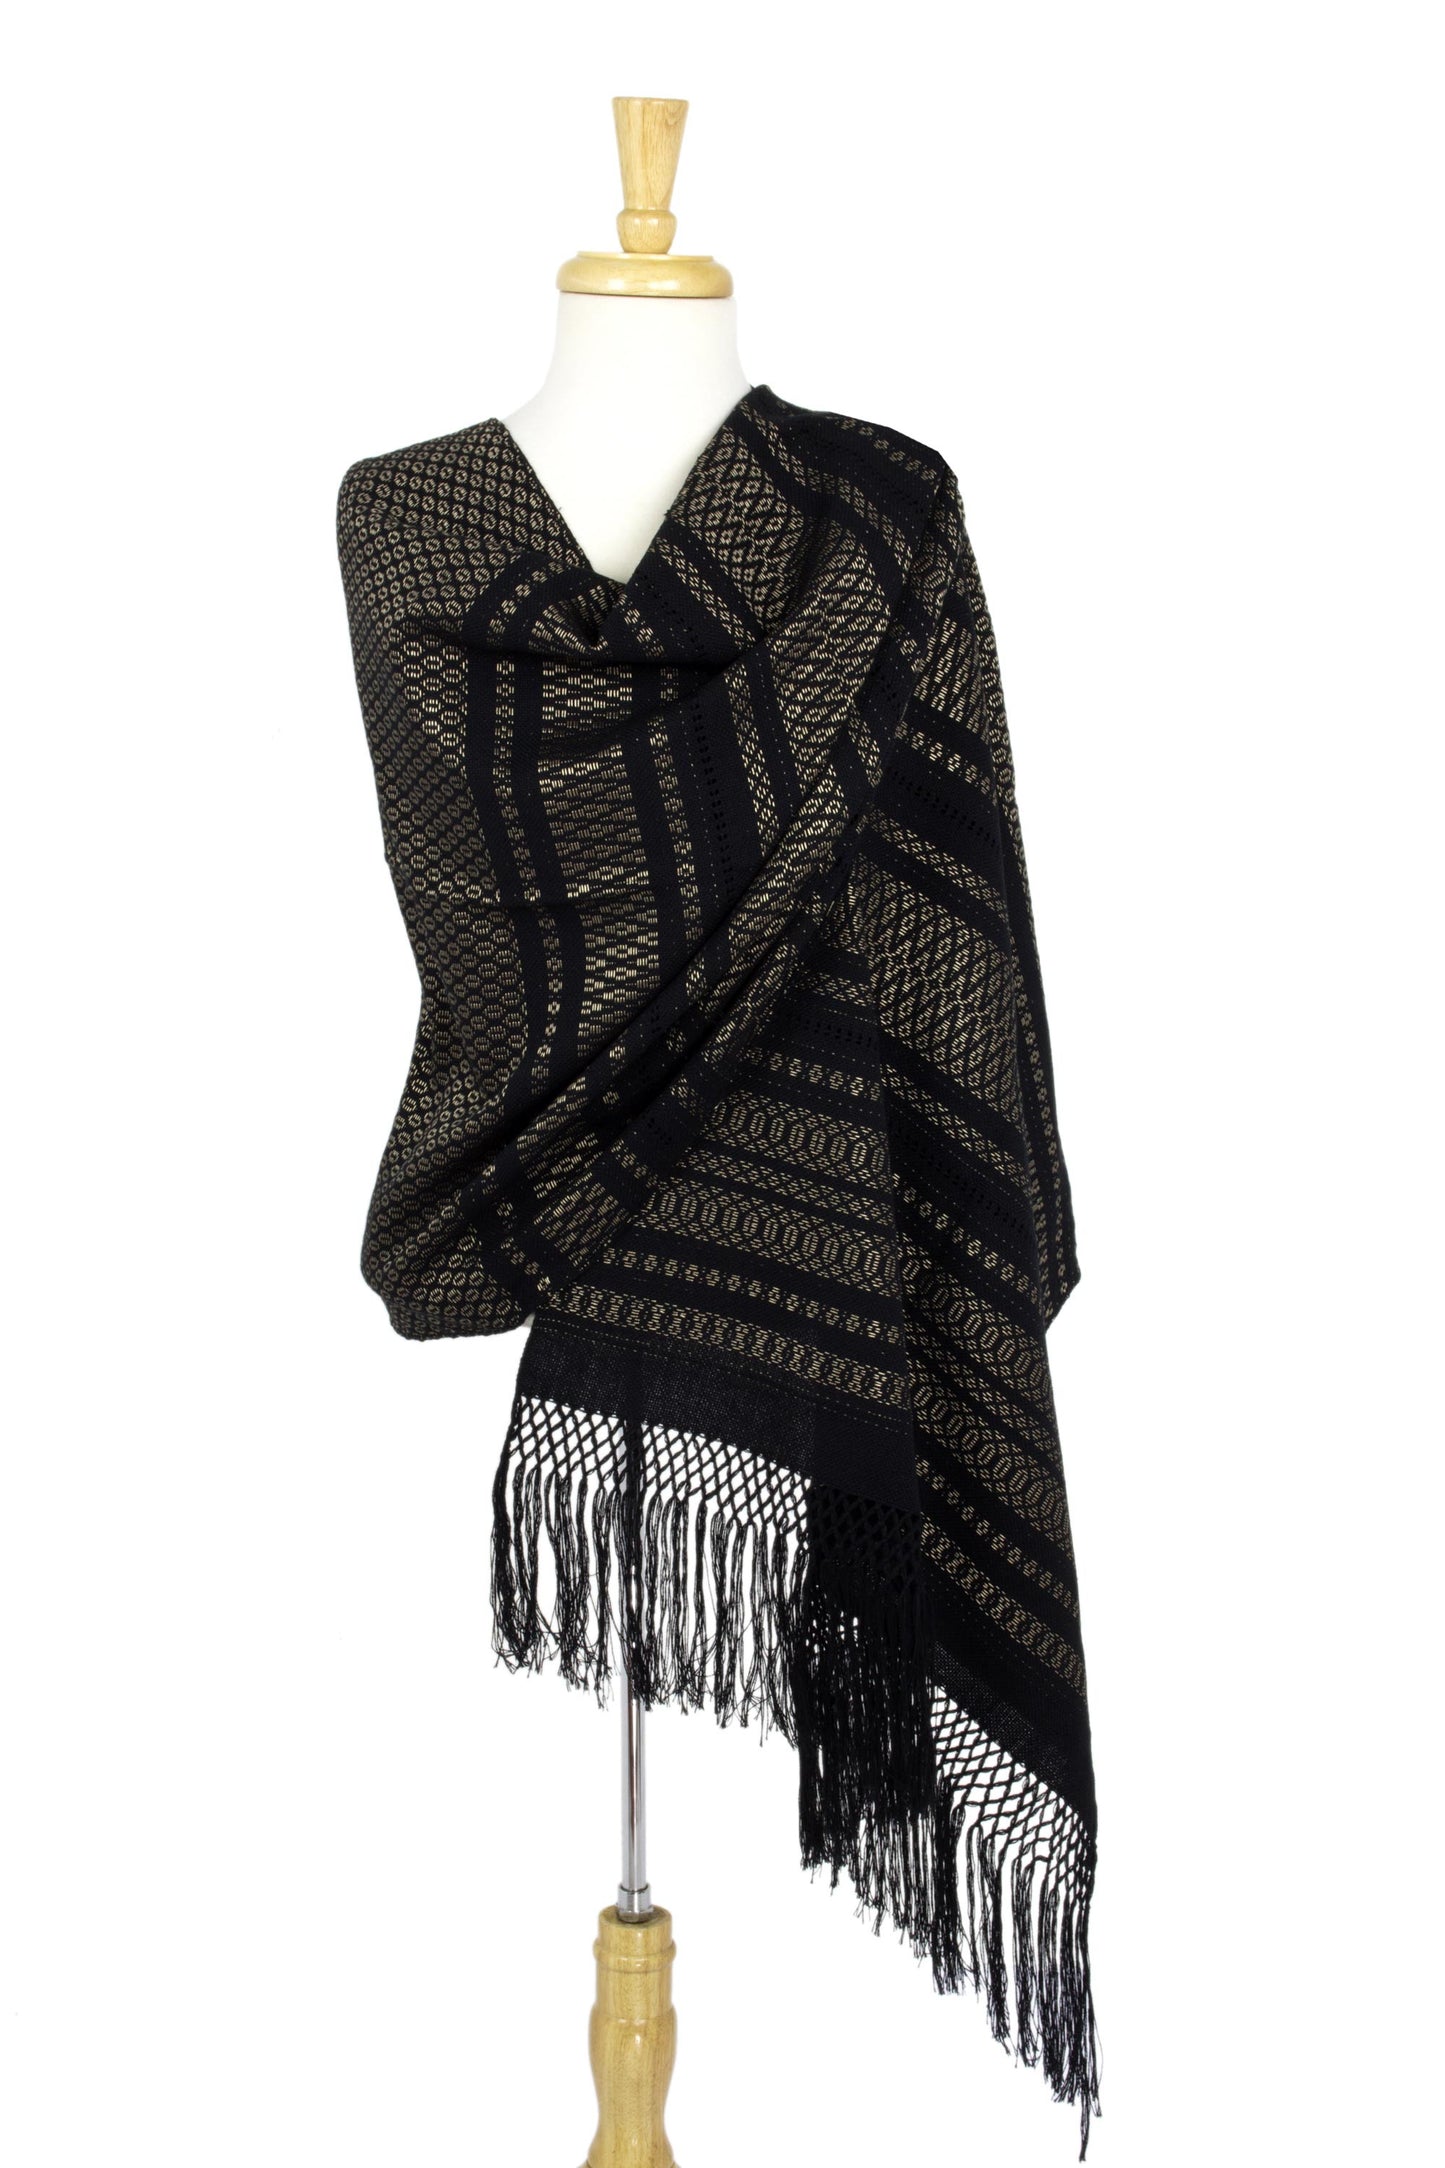 'Night of Golden Stars' Handwoven Black Cotton Rebozo Shawl with Golden Accents